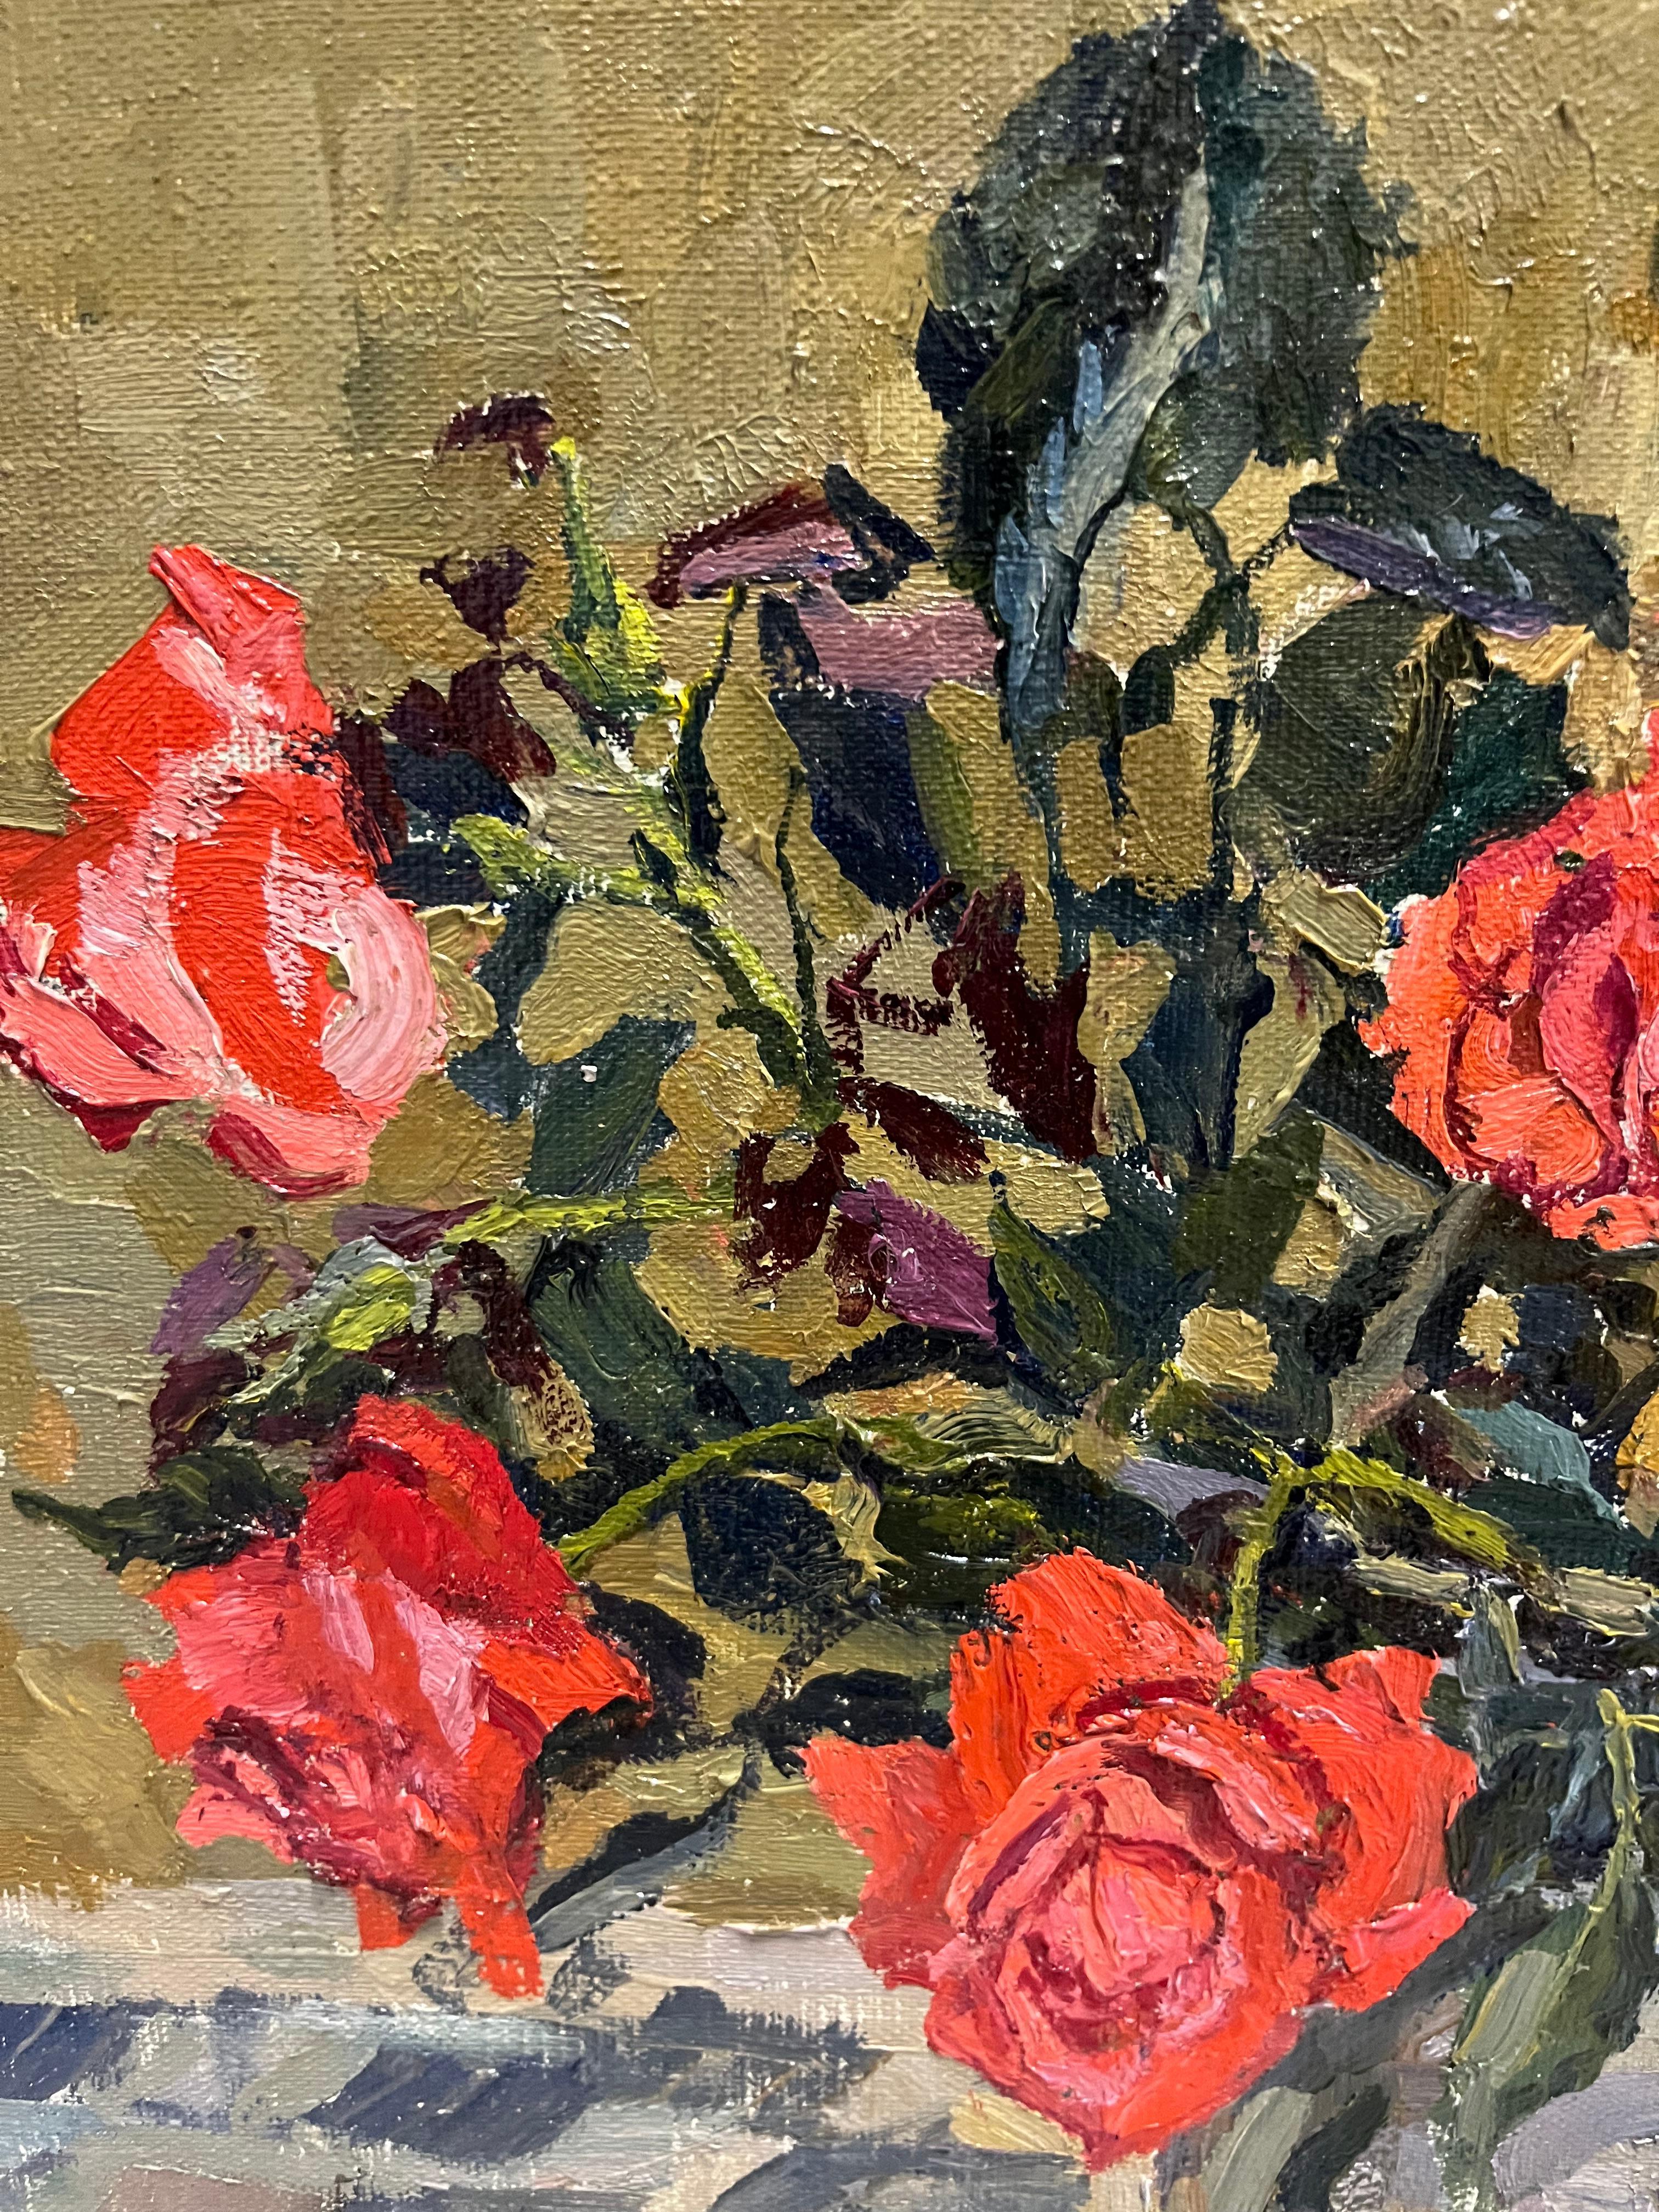 Flowers, Roses, red,pink

MAYA KOPITZEVA    (Gagra, Georgia, 1924 - 2005)

Maya Kopitzeva’s works have been acquired by the Russian Ministry of Culture, by the Foundation for the Russian Culture, by various collectors in Europe, Japan, United States